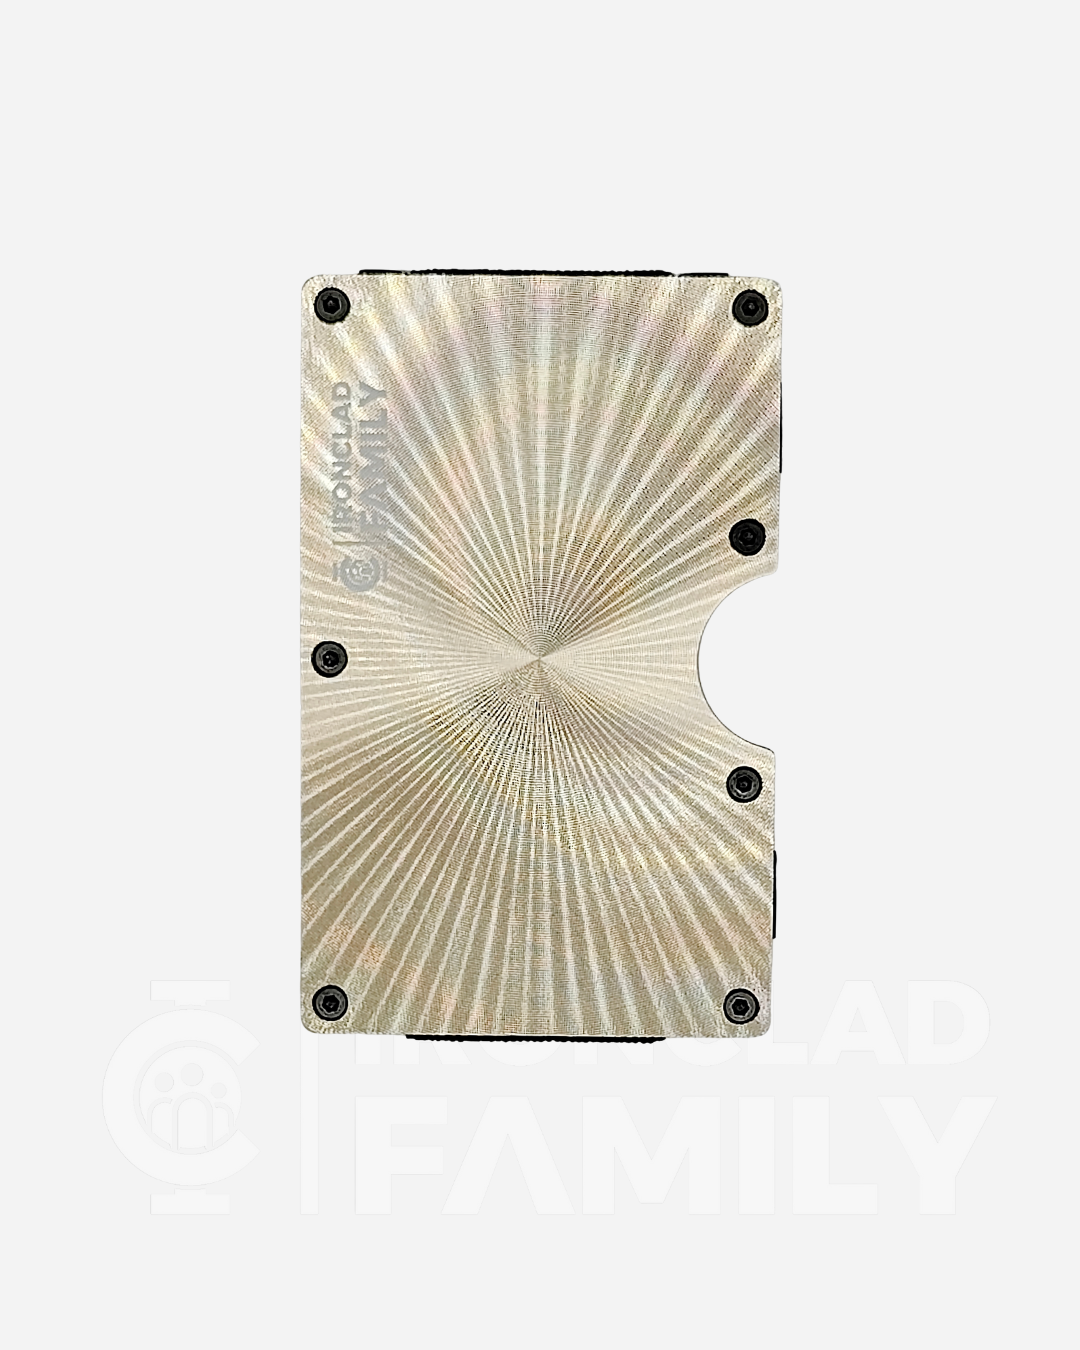 White textured metal RFID blocking wallet with a silver design